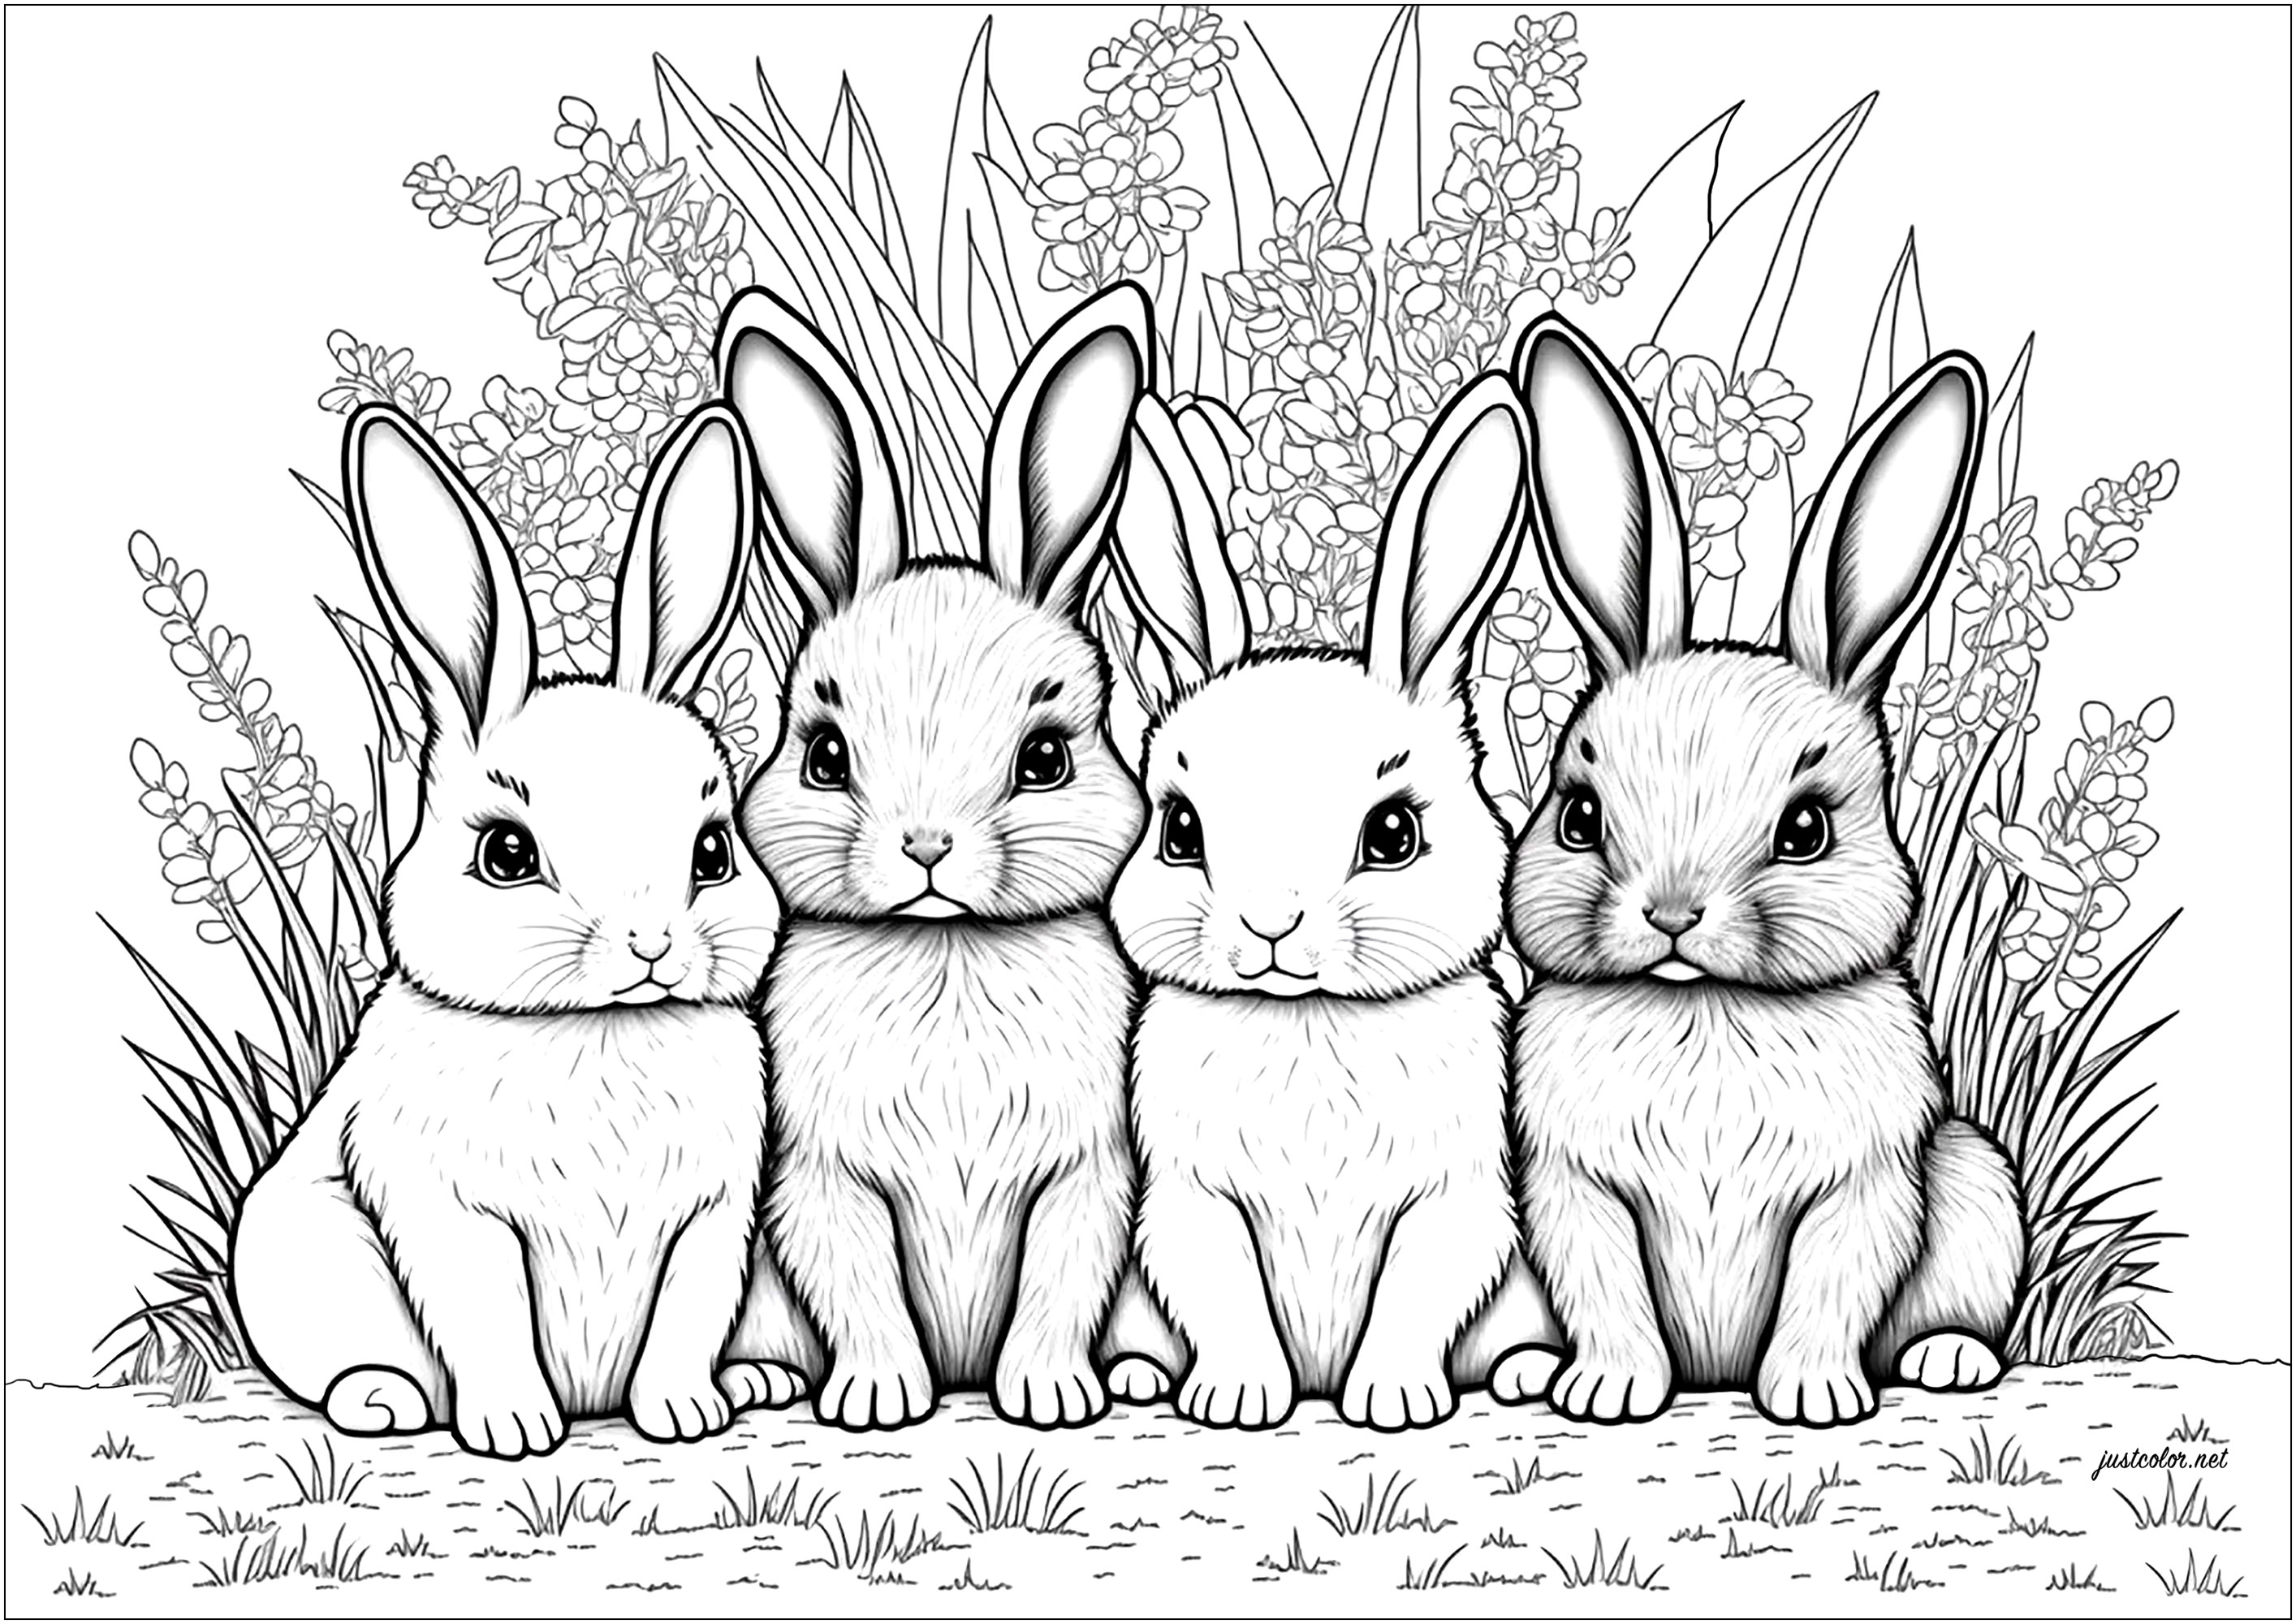 Four cute little bunnies to color, with a leafy background. This coloring page is as cute as can be! Four little bunnies, each more adorable than the last, are waiting for you, ready to be colored. They all sit on their hind legs, with long ears and big eyes, and are surrounded by a leafy background.